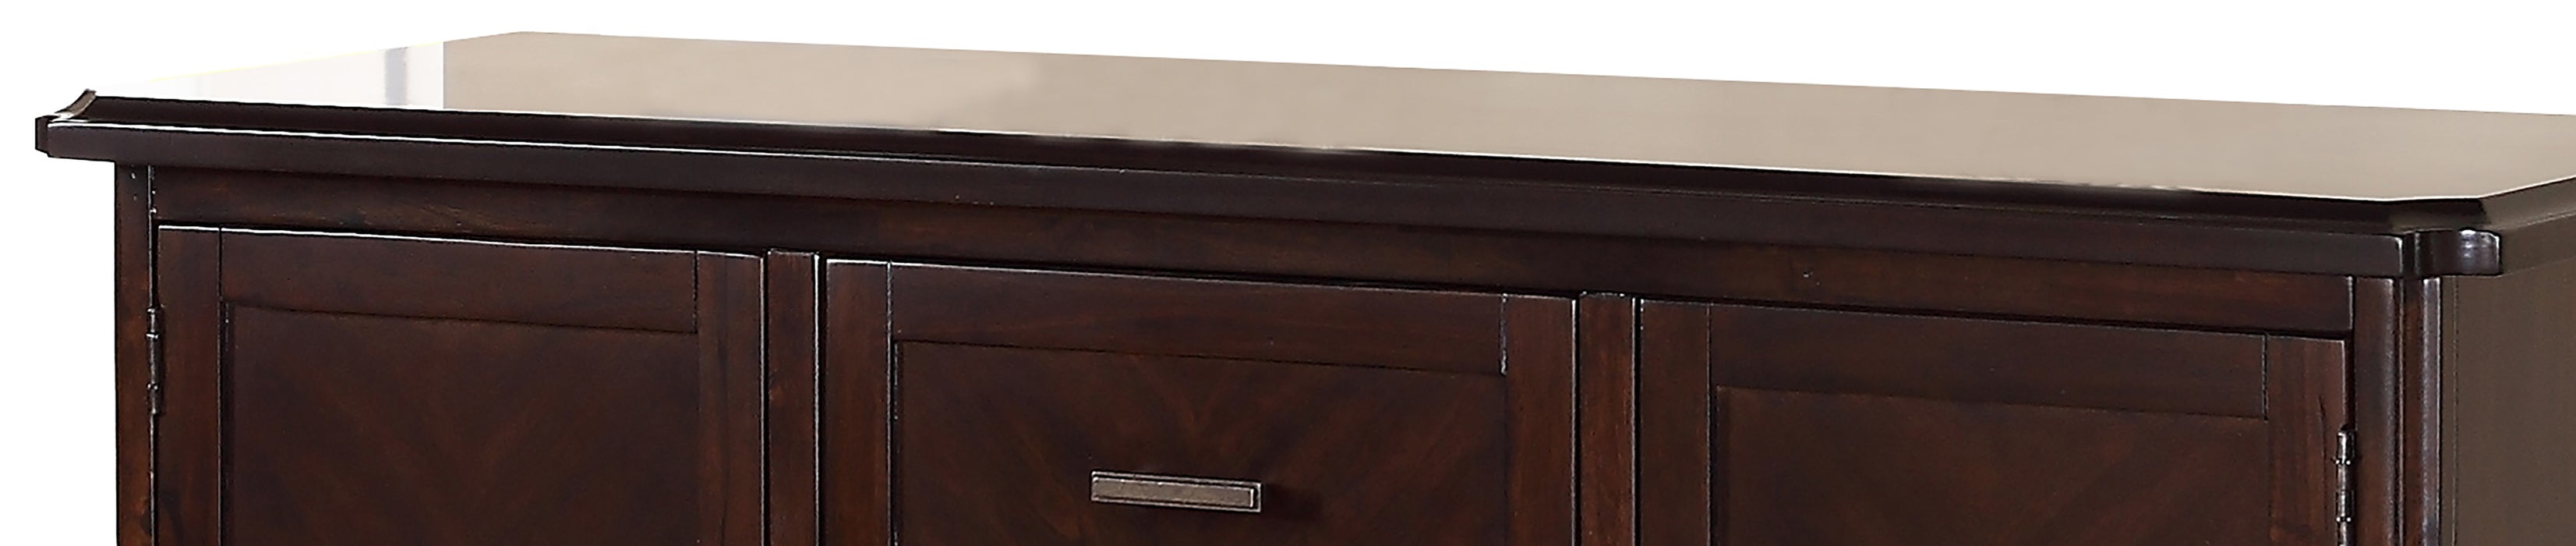 Pam Transitional Style Dining Server in Espresso finish Wood